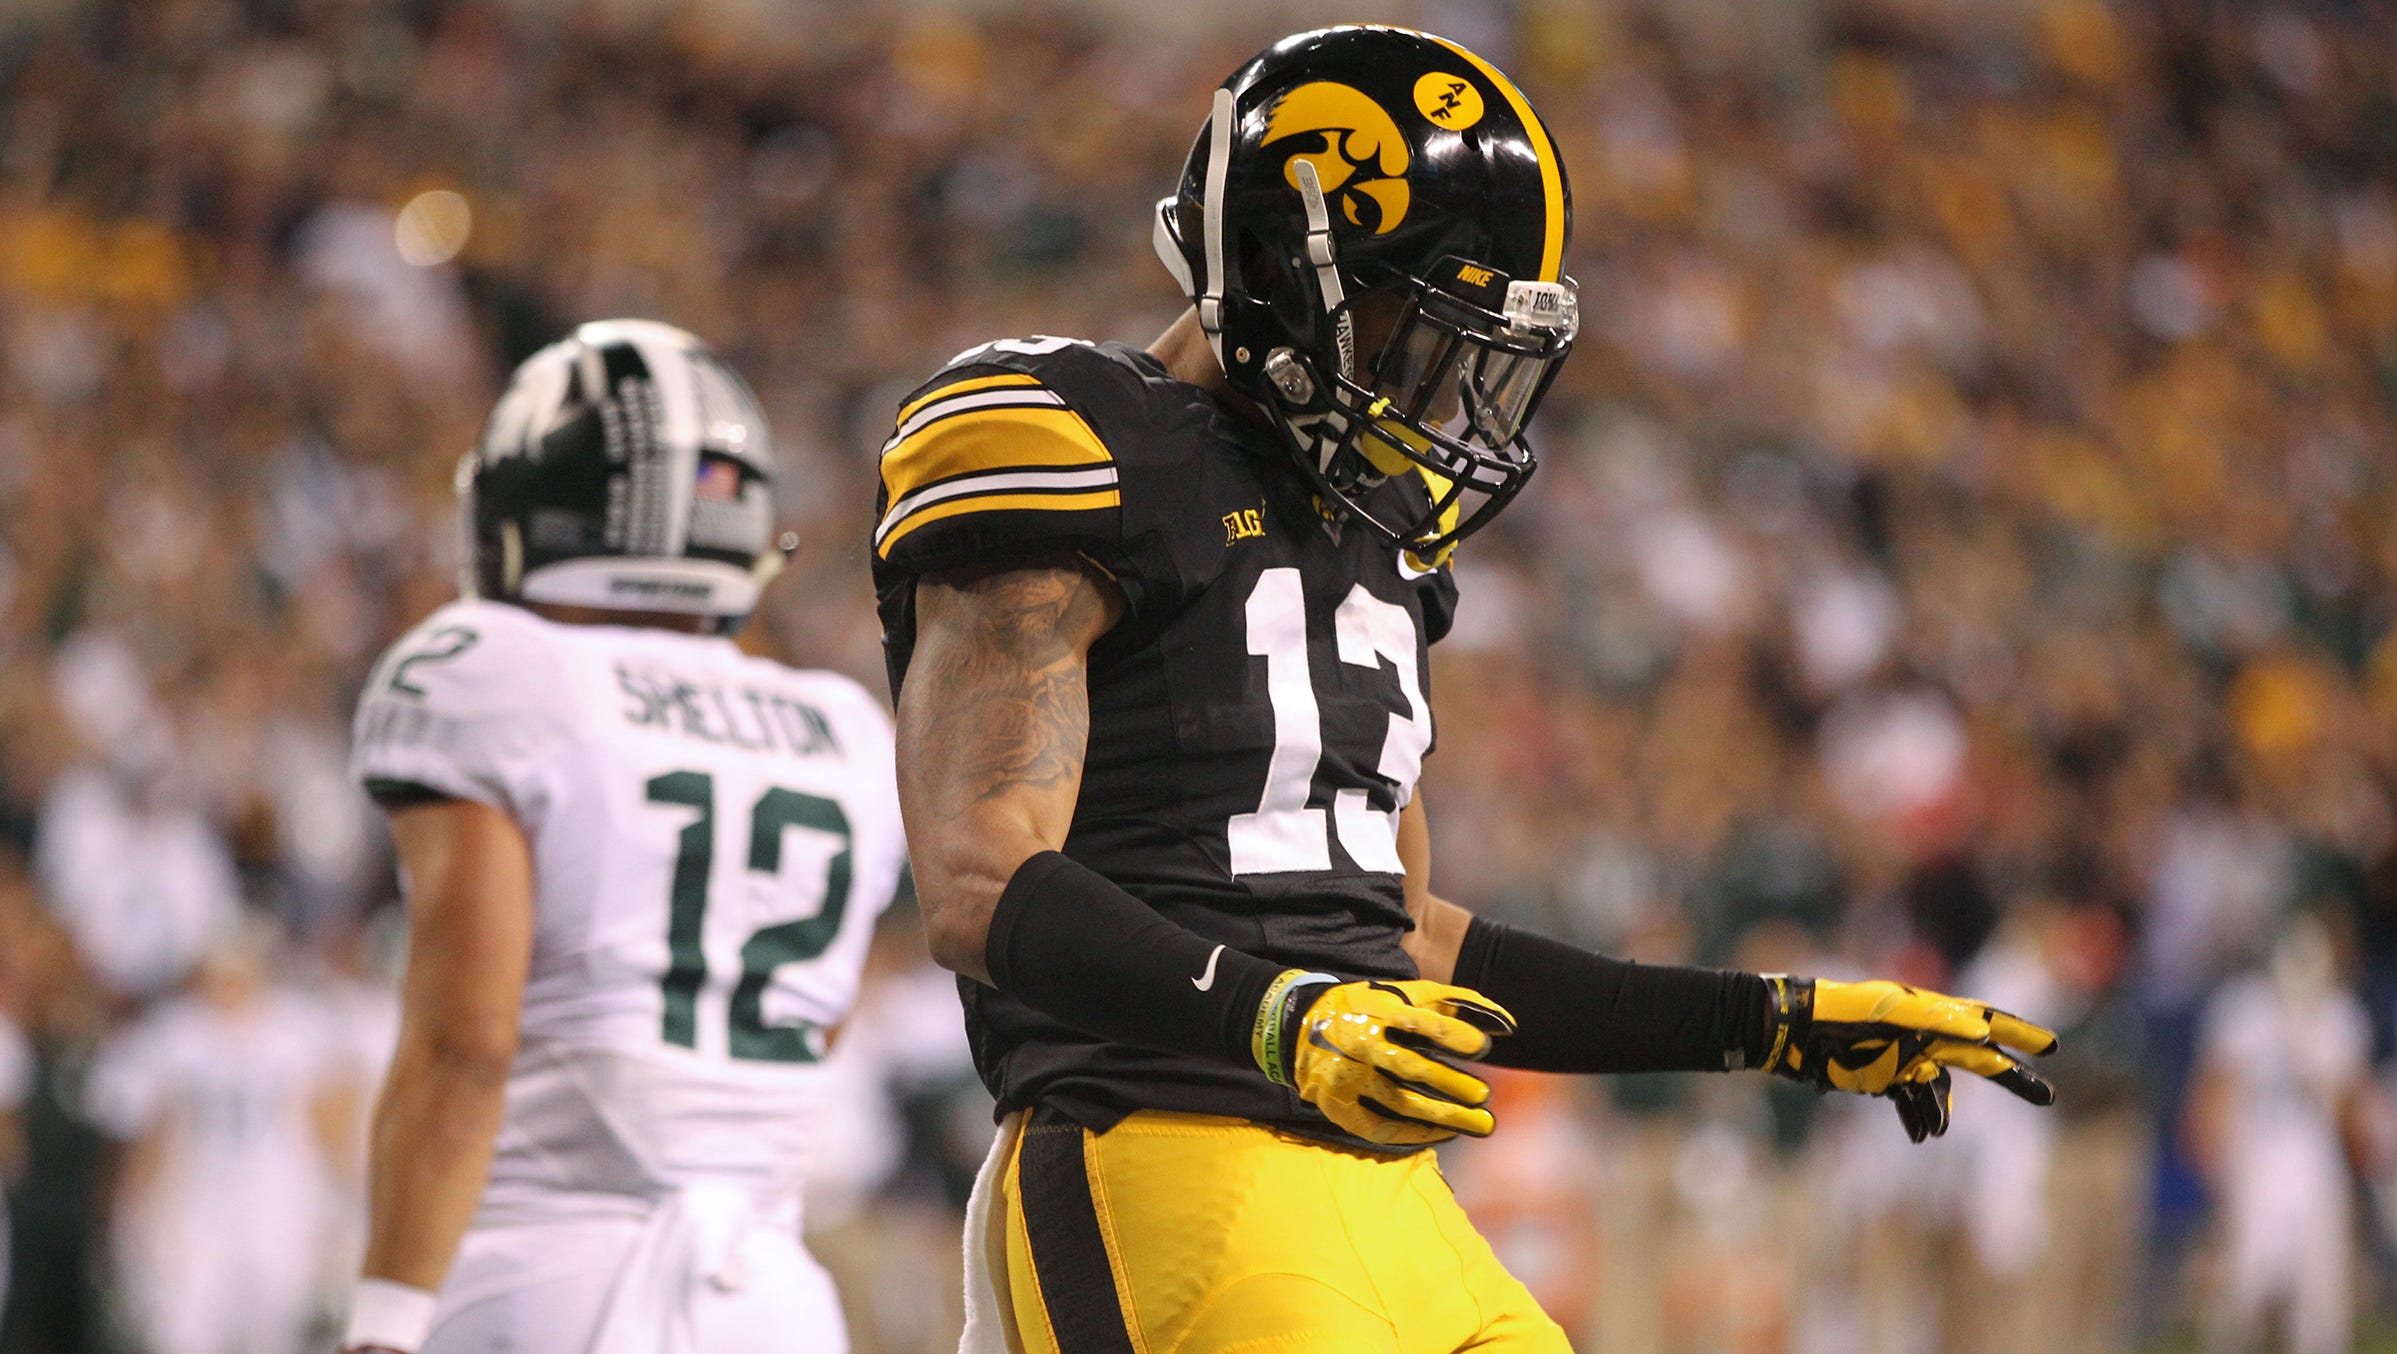 Iowa's Greg Mabin celebrates after forcing a fourth down during the Hawkeyes' Big Ten Championship game against Michigan State at Lucas Oil Stadium in Indianapolis, Ind. on Saturday, Dec. 5, 2015.